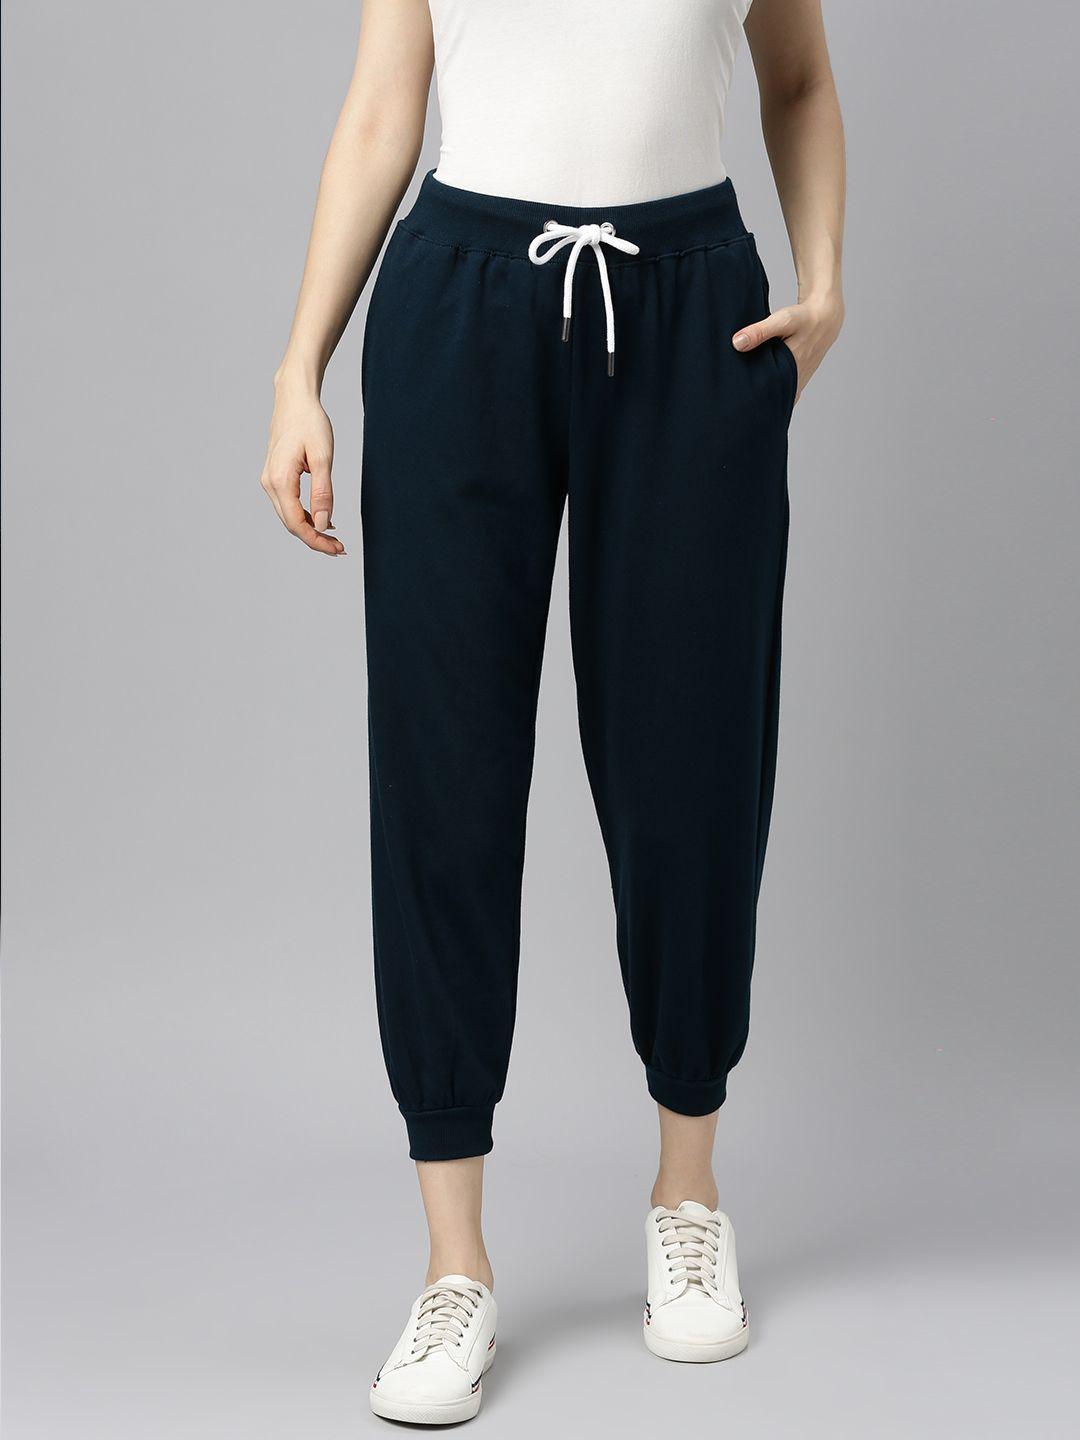 the-dry-state-women-navy-blue-loose-fit-high-rise-easy-wash-joggers-trousers